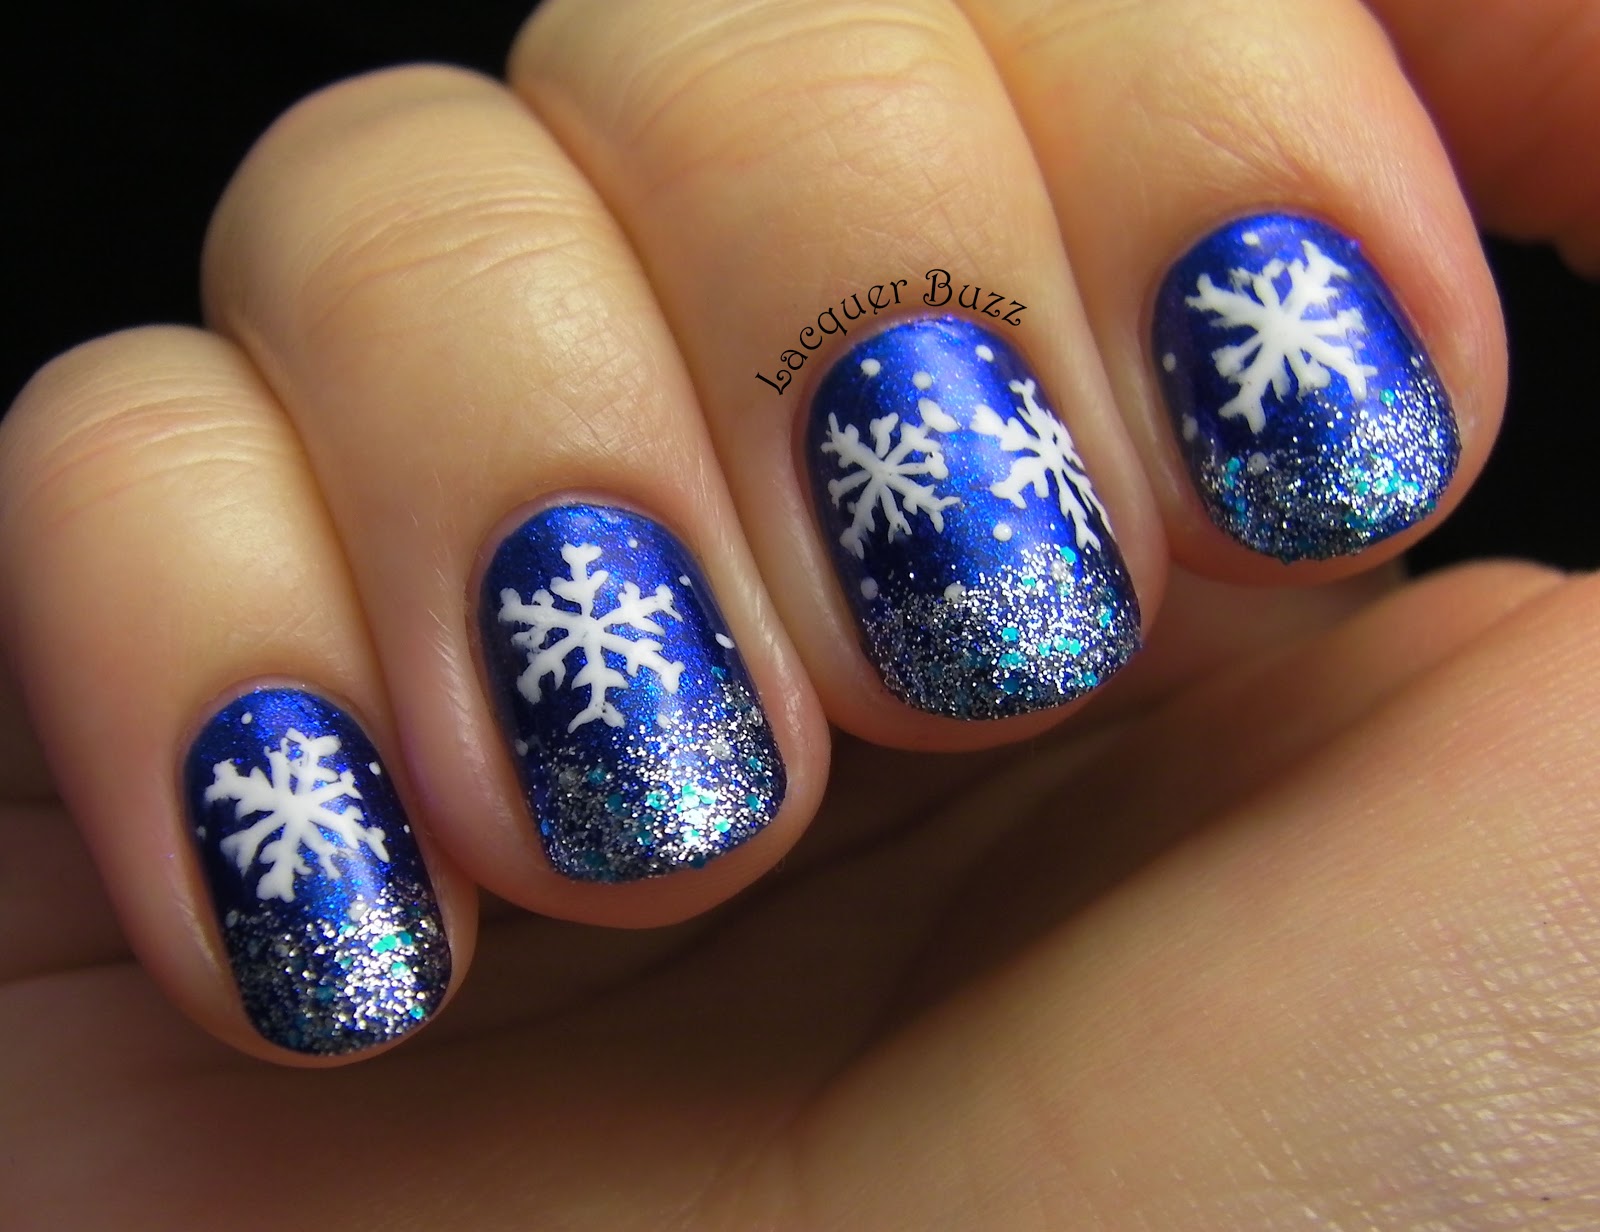 Lacquer Buzz: Monday Blues: Blue Year's Snowflakes